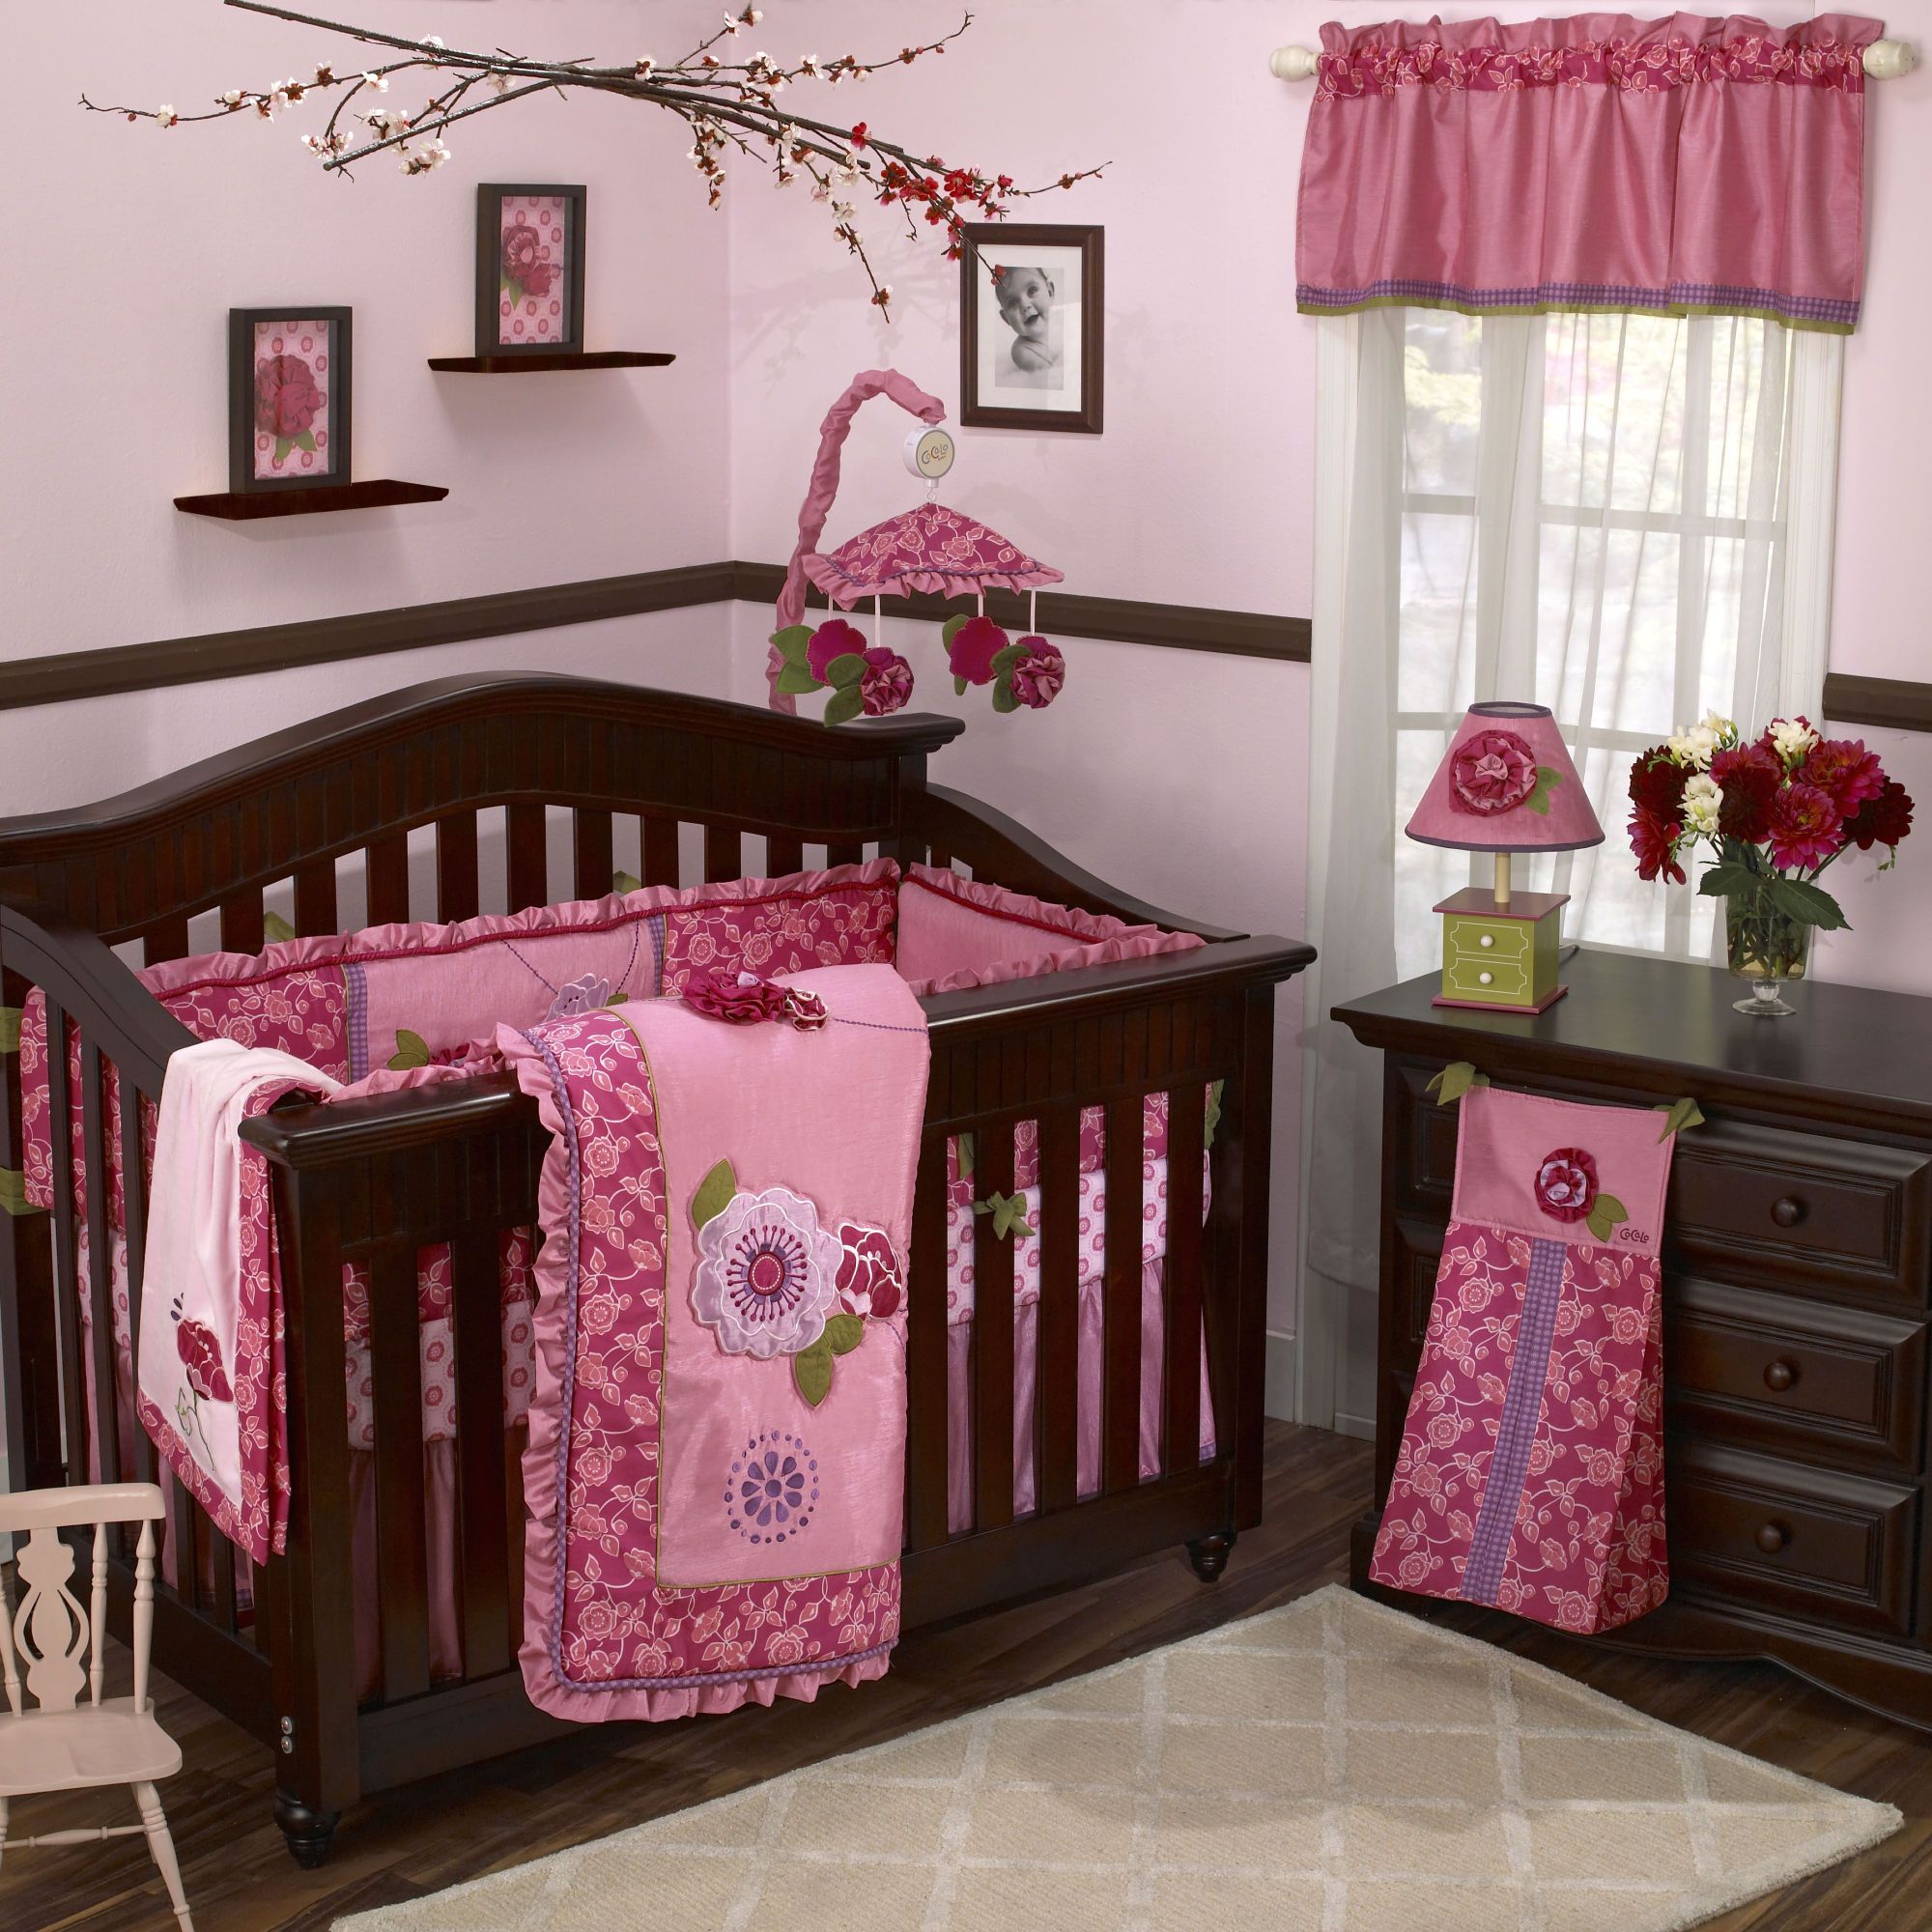 Room Decor For A Baby Girl -   Best Baby girl rooms ideas